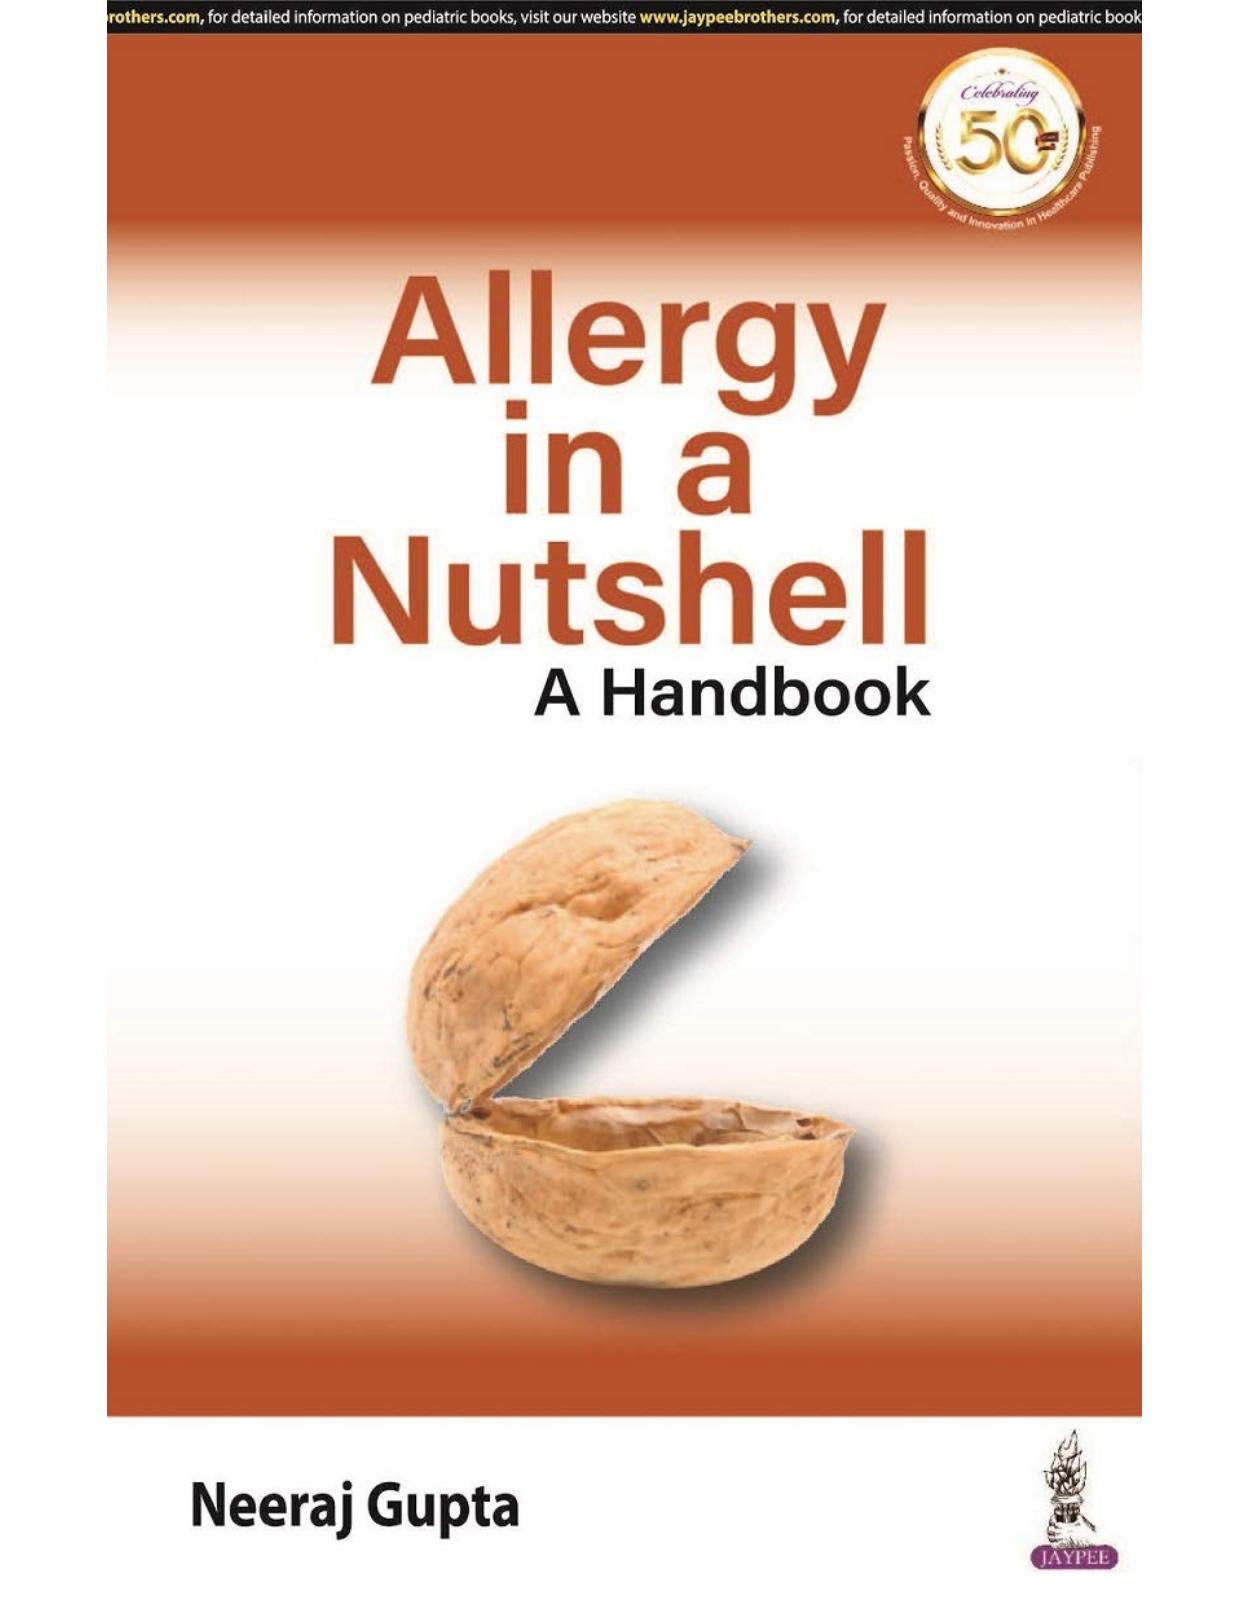 Allergy in a Nutshell